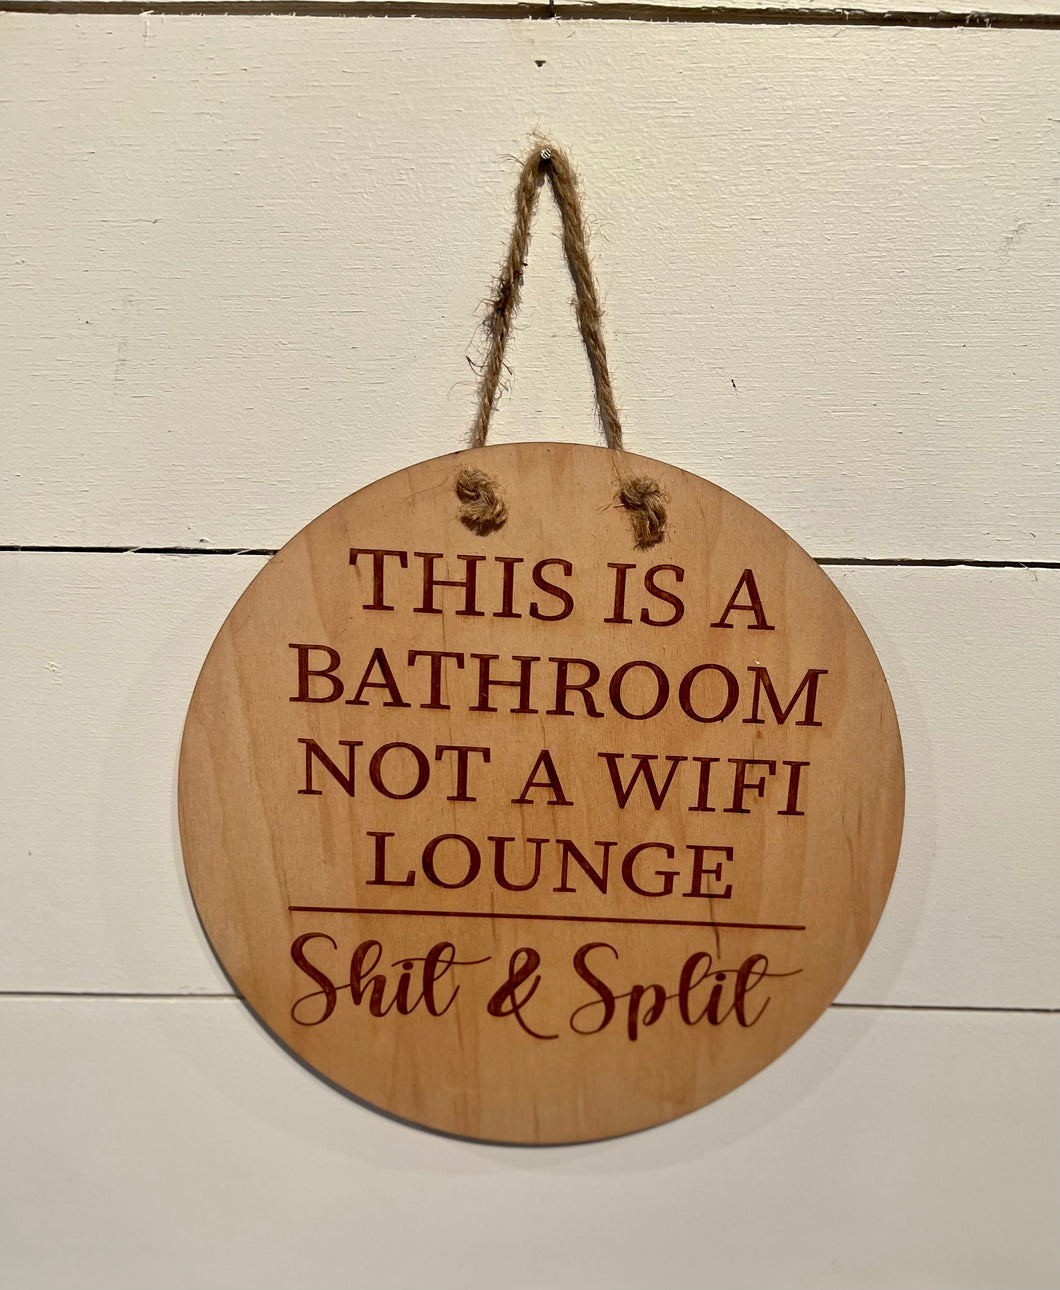 **READY TO SHIP**This is a bathroom not a Wi-Fi Lounge SHIT & SPLIT